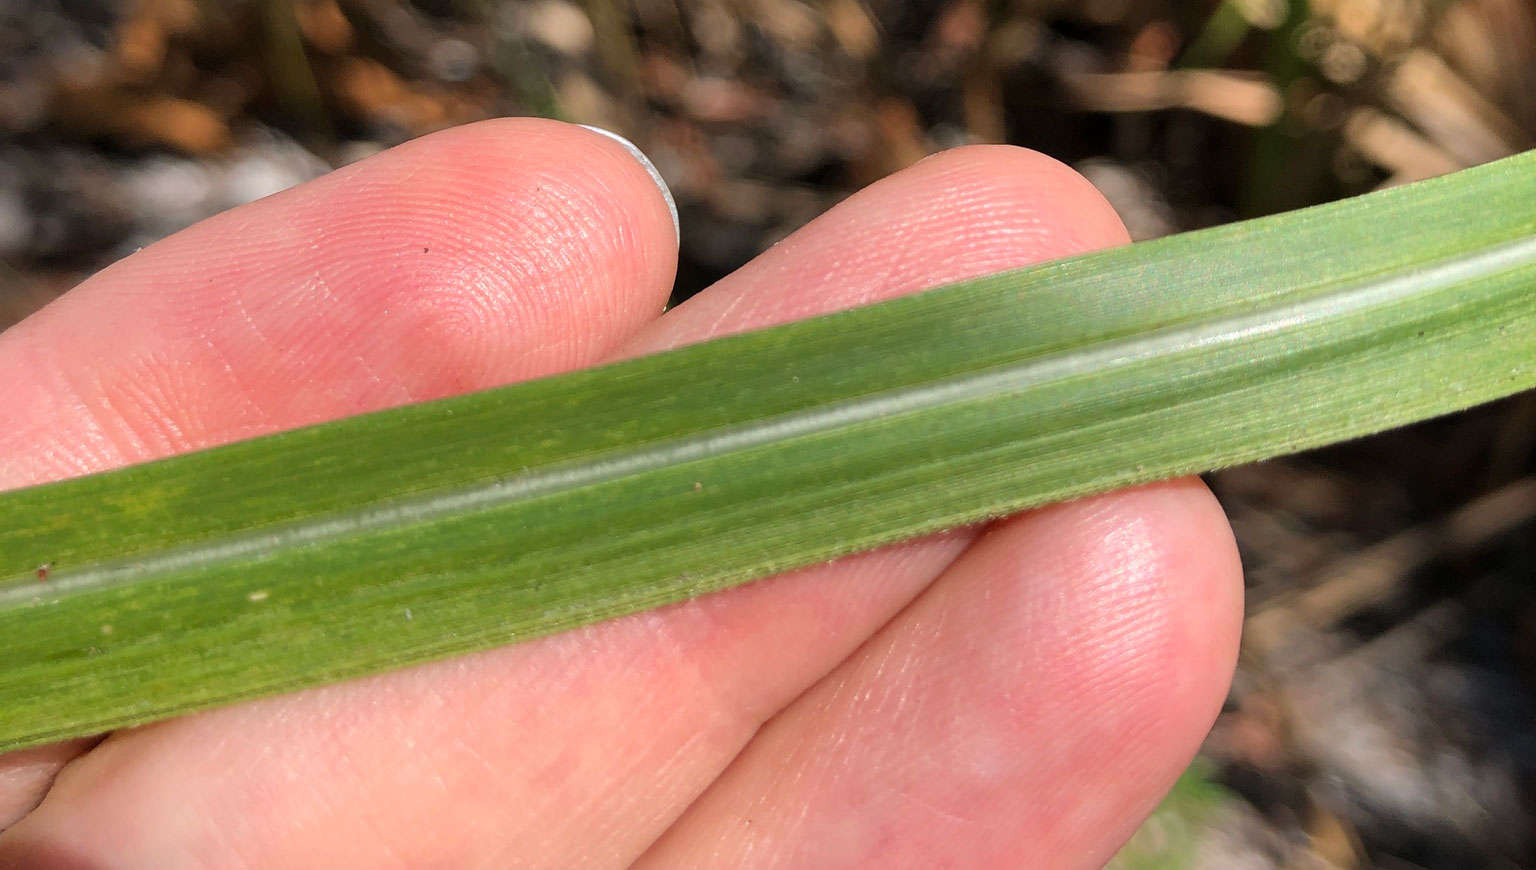 Photograph showing a close-up of part of the blade of a cogongrass leaf with an obvious white, slight off-center midvein.